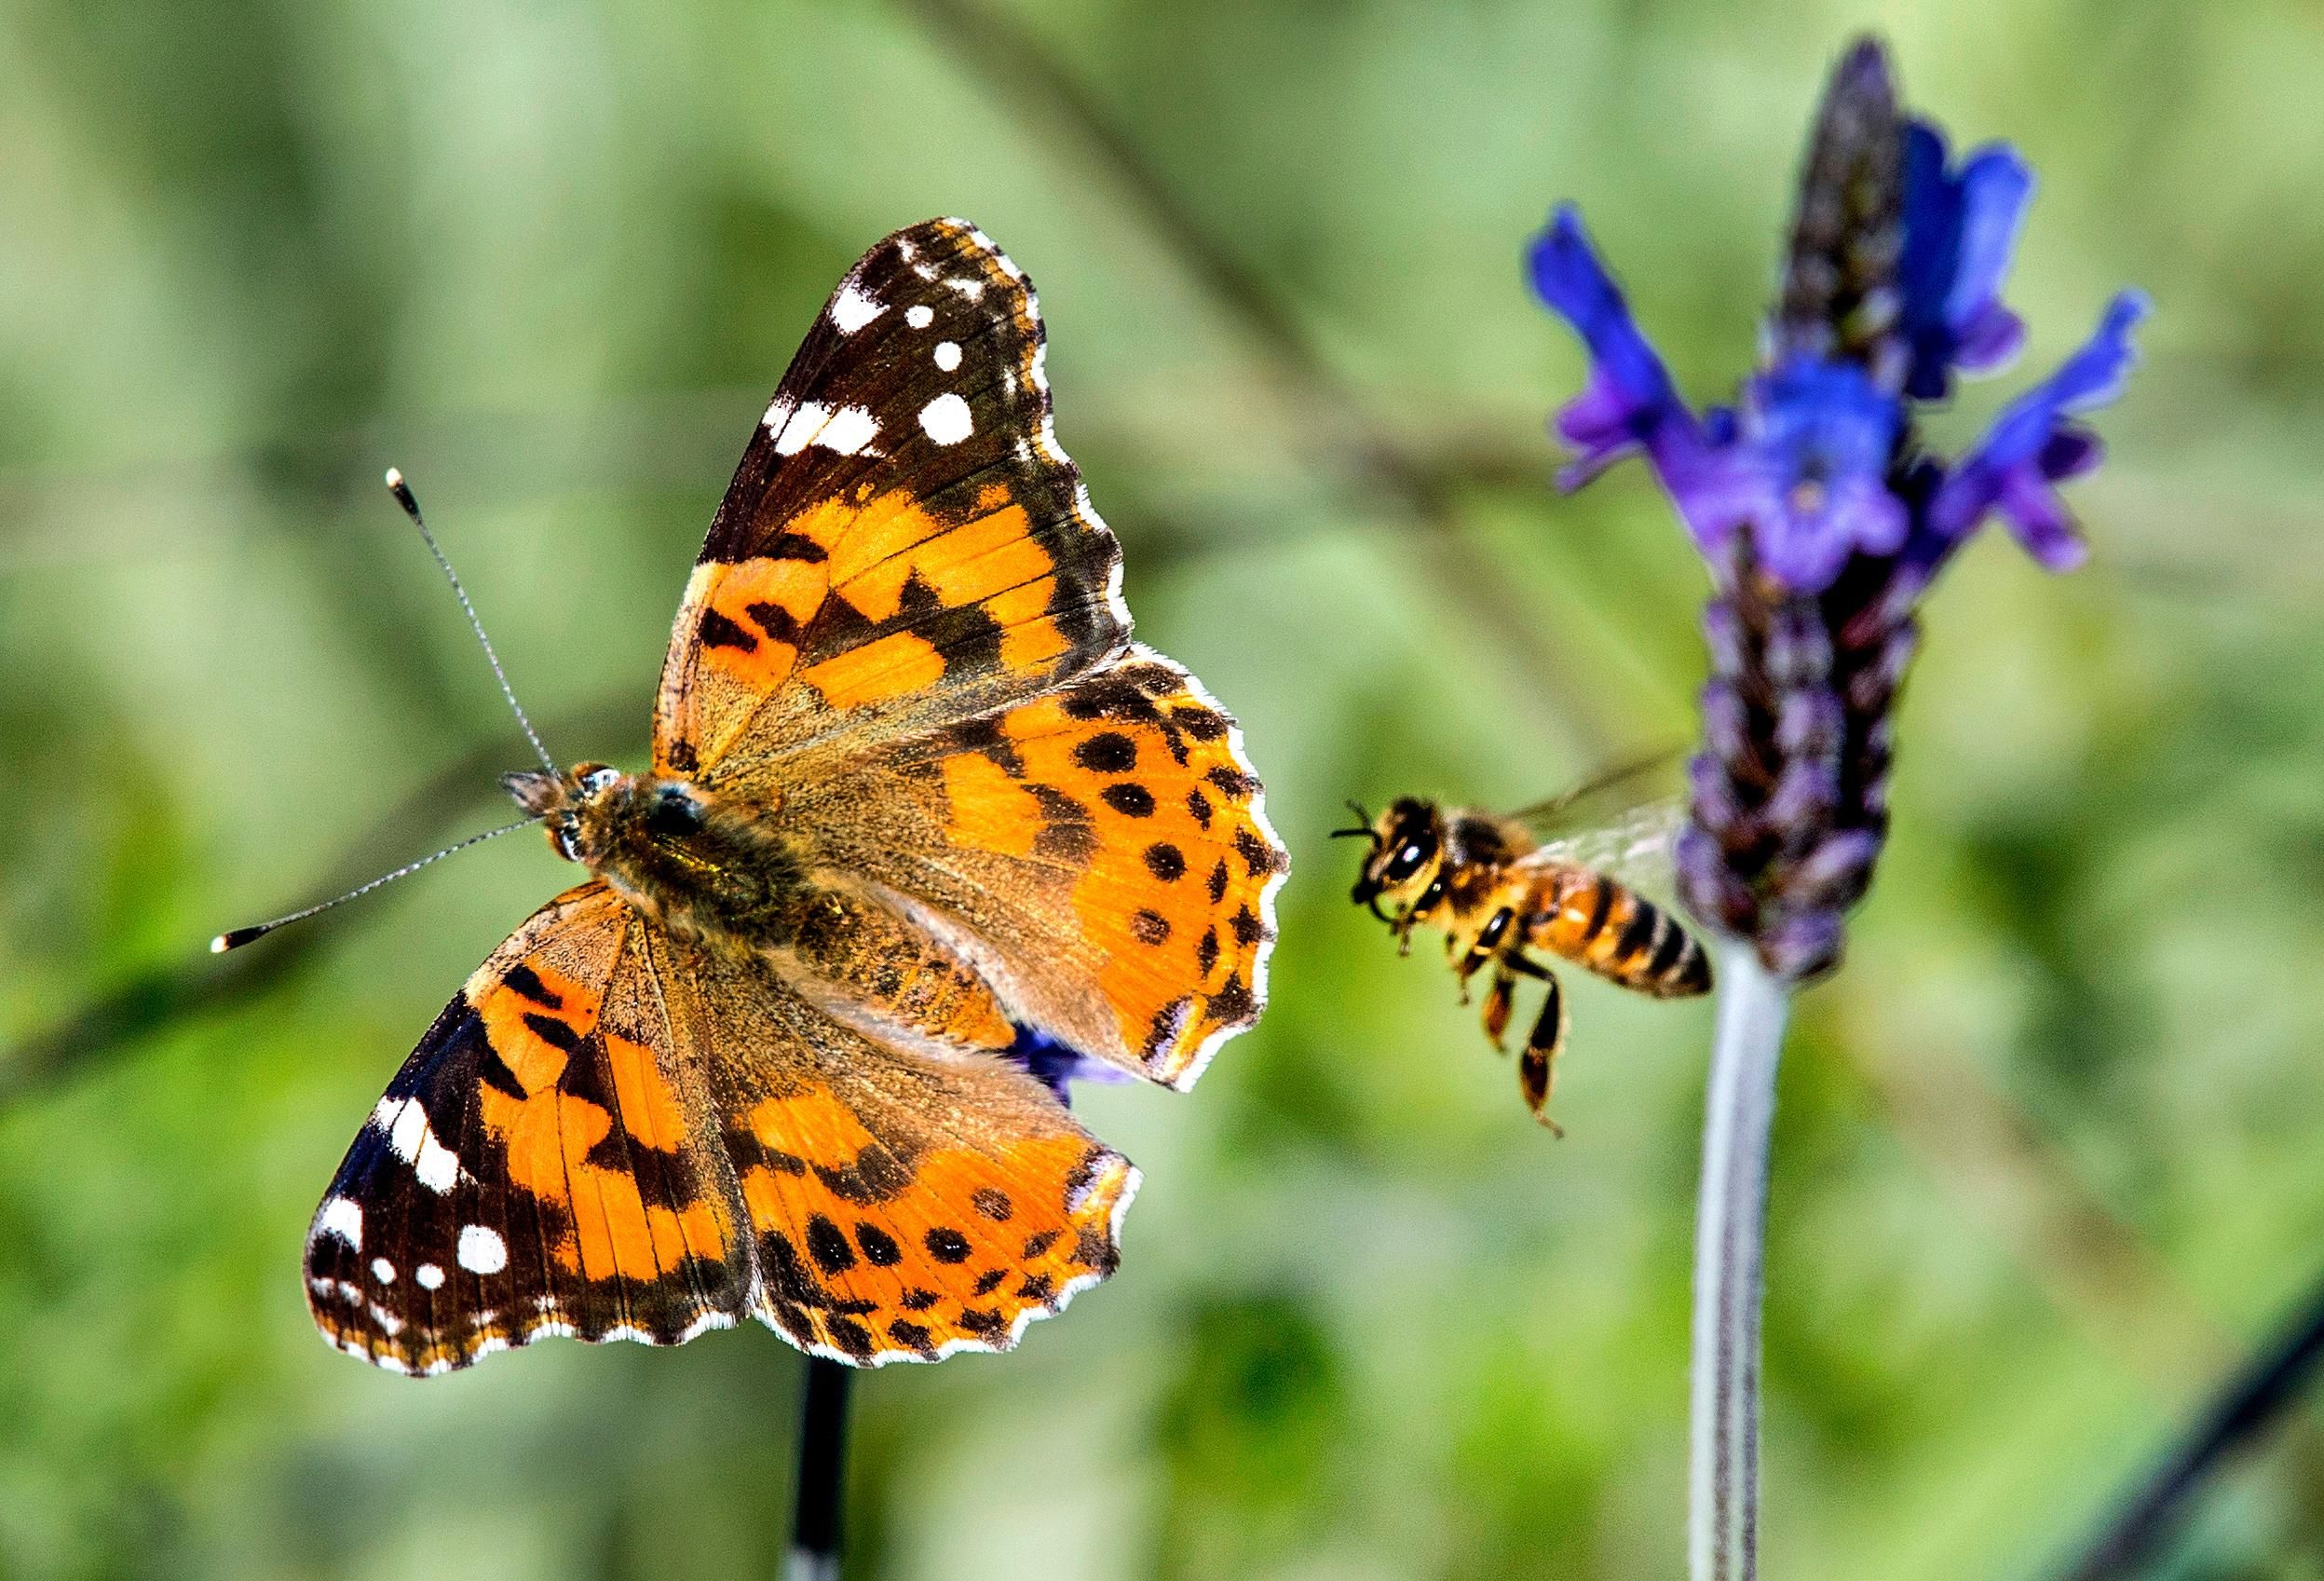 Neonics impact on bees and butterflies